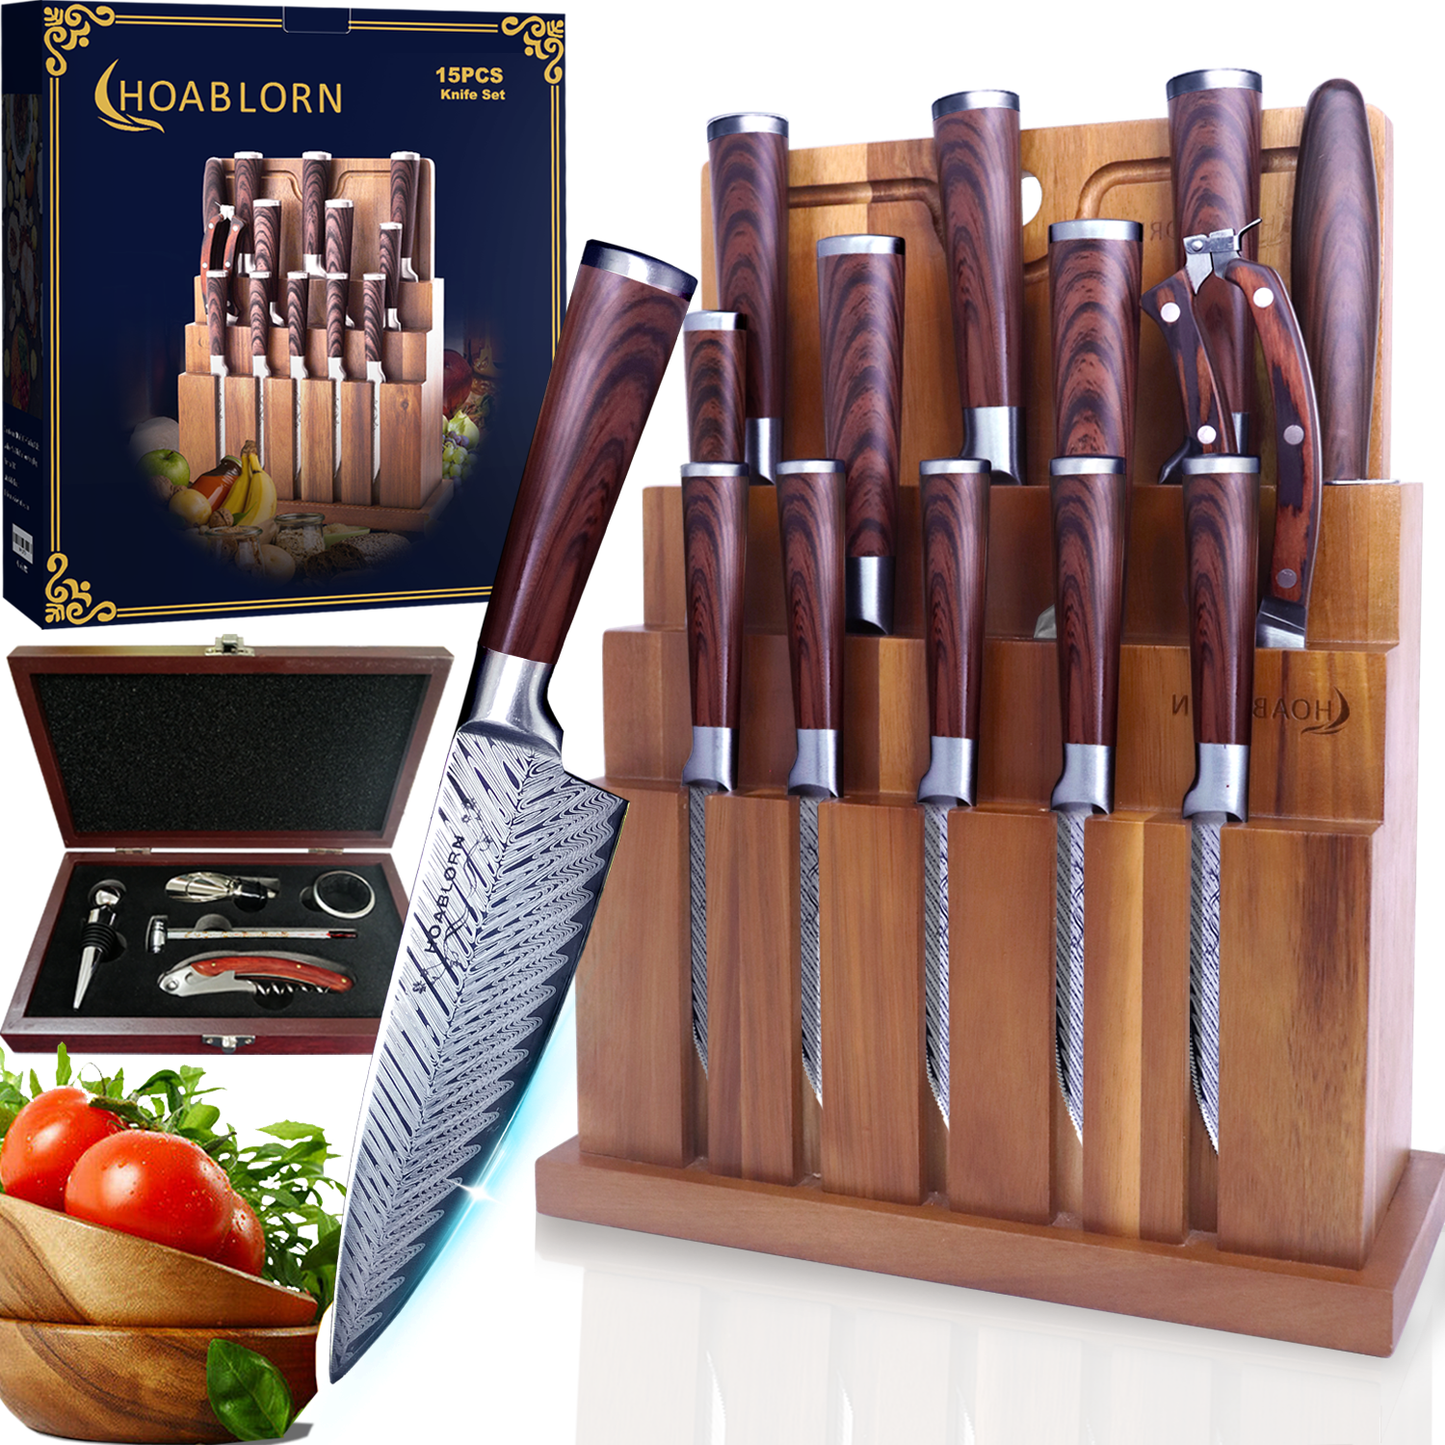 ChefHoablorn Knife Set with Block 20PCS AK01, Damascus Look and Complete Kitchen Knives, Extra Large Knife Holder with Cutting Board, High Carbon Stainless Steel